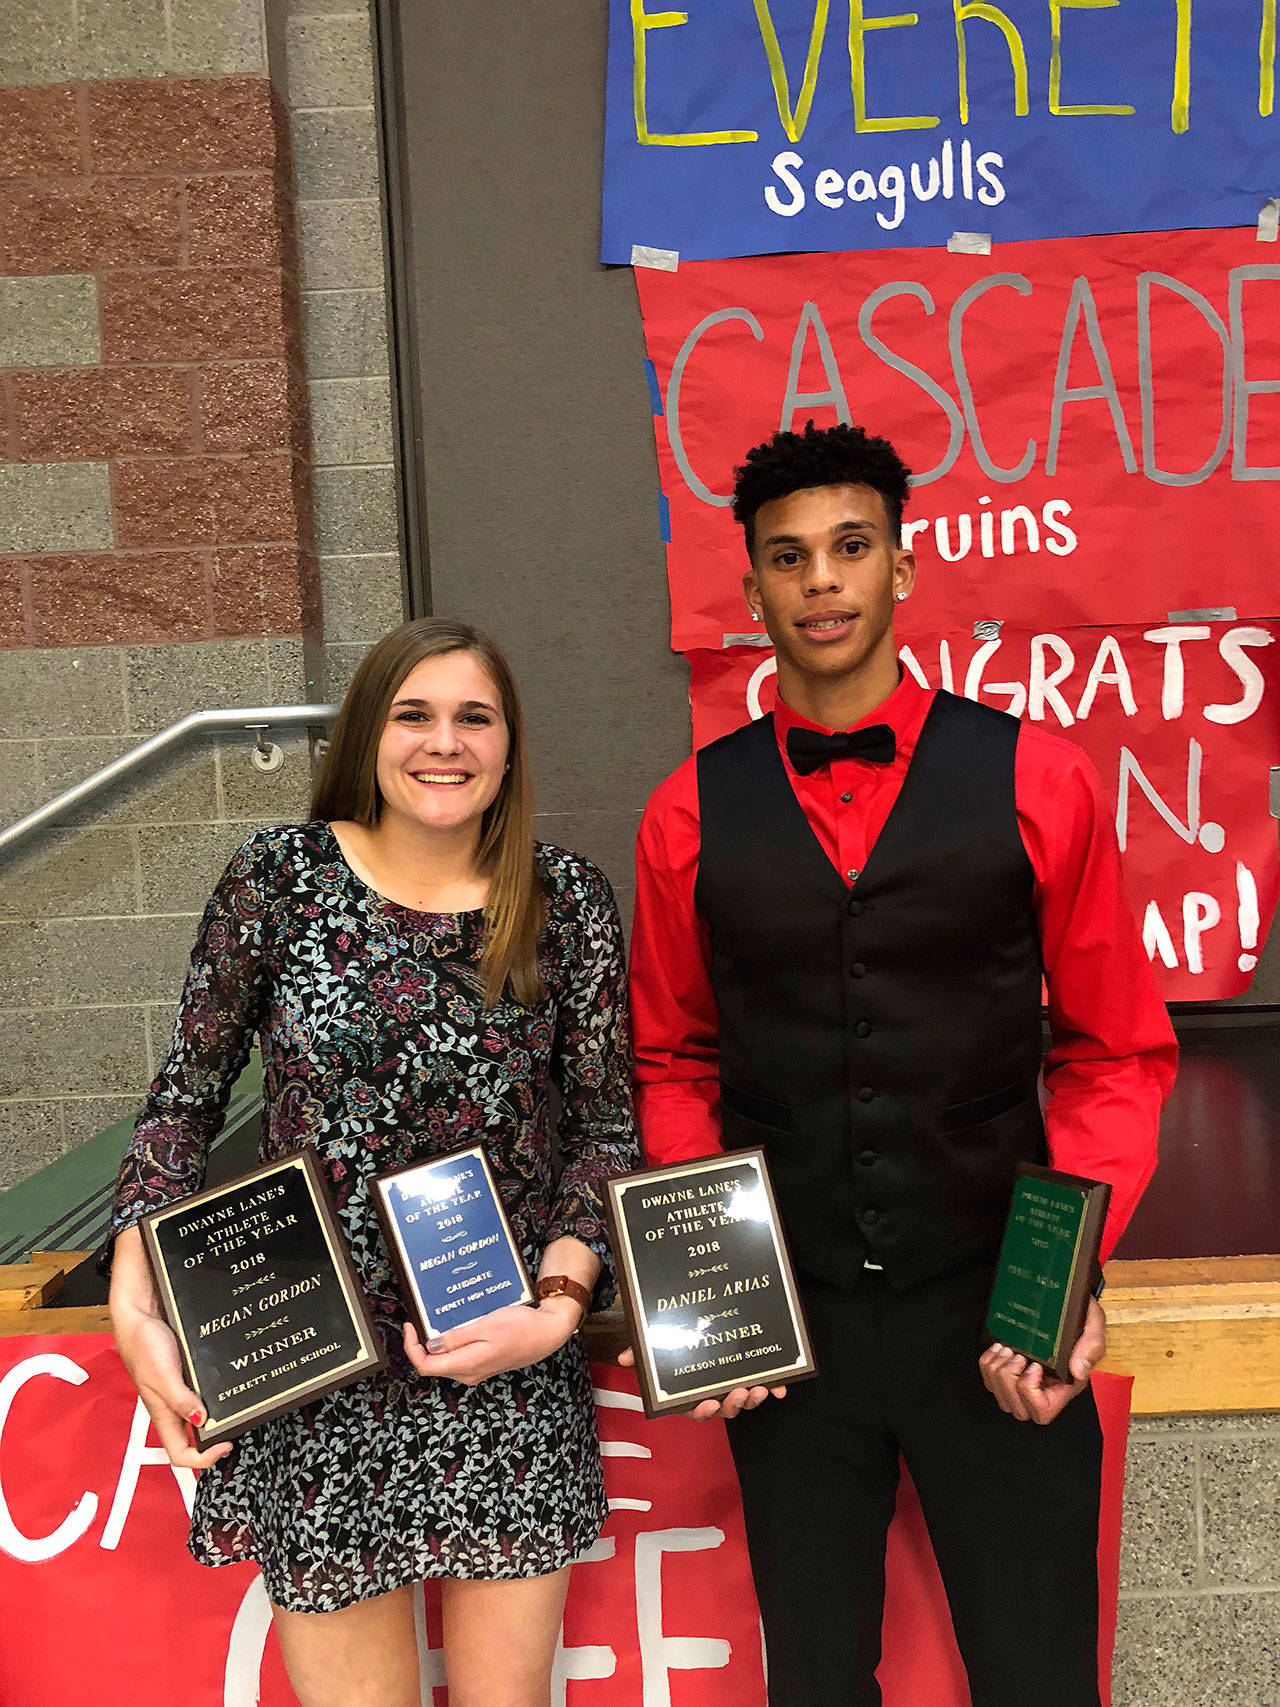 Everett School District photo                                Everett’s Megan Gordon (left) and Jackson’s Daniel Arias were the recipients of $2,500 scholarships from Dwayne Lane’s at the Everett School District athletic banquet Thursday at Jackson High School in Mill Creek.